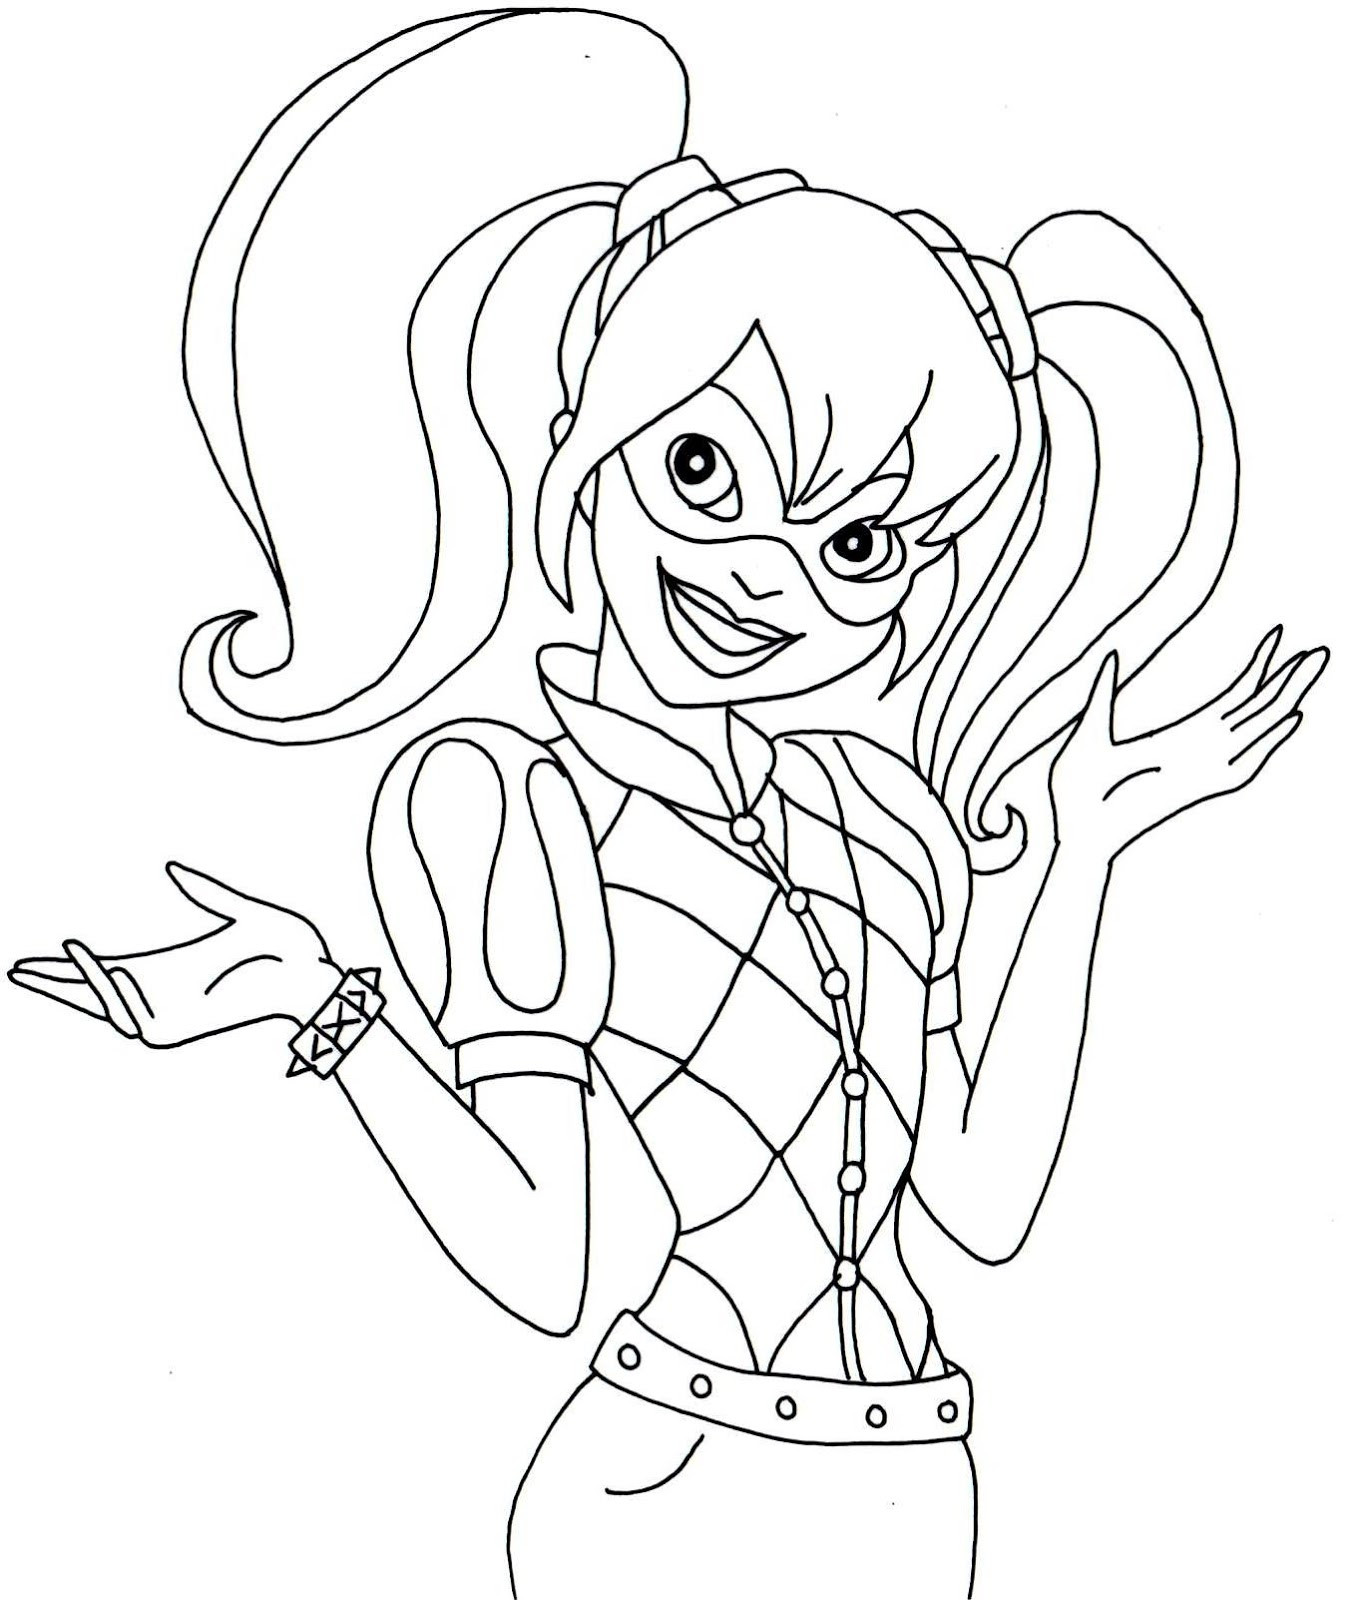 Harley Quinn Coloring Pages For Kids
 Harley Quinn Suicide Squad Coloring Pages Coloring Pages